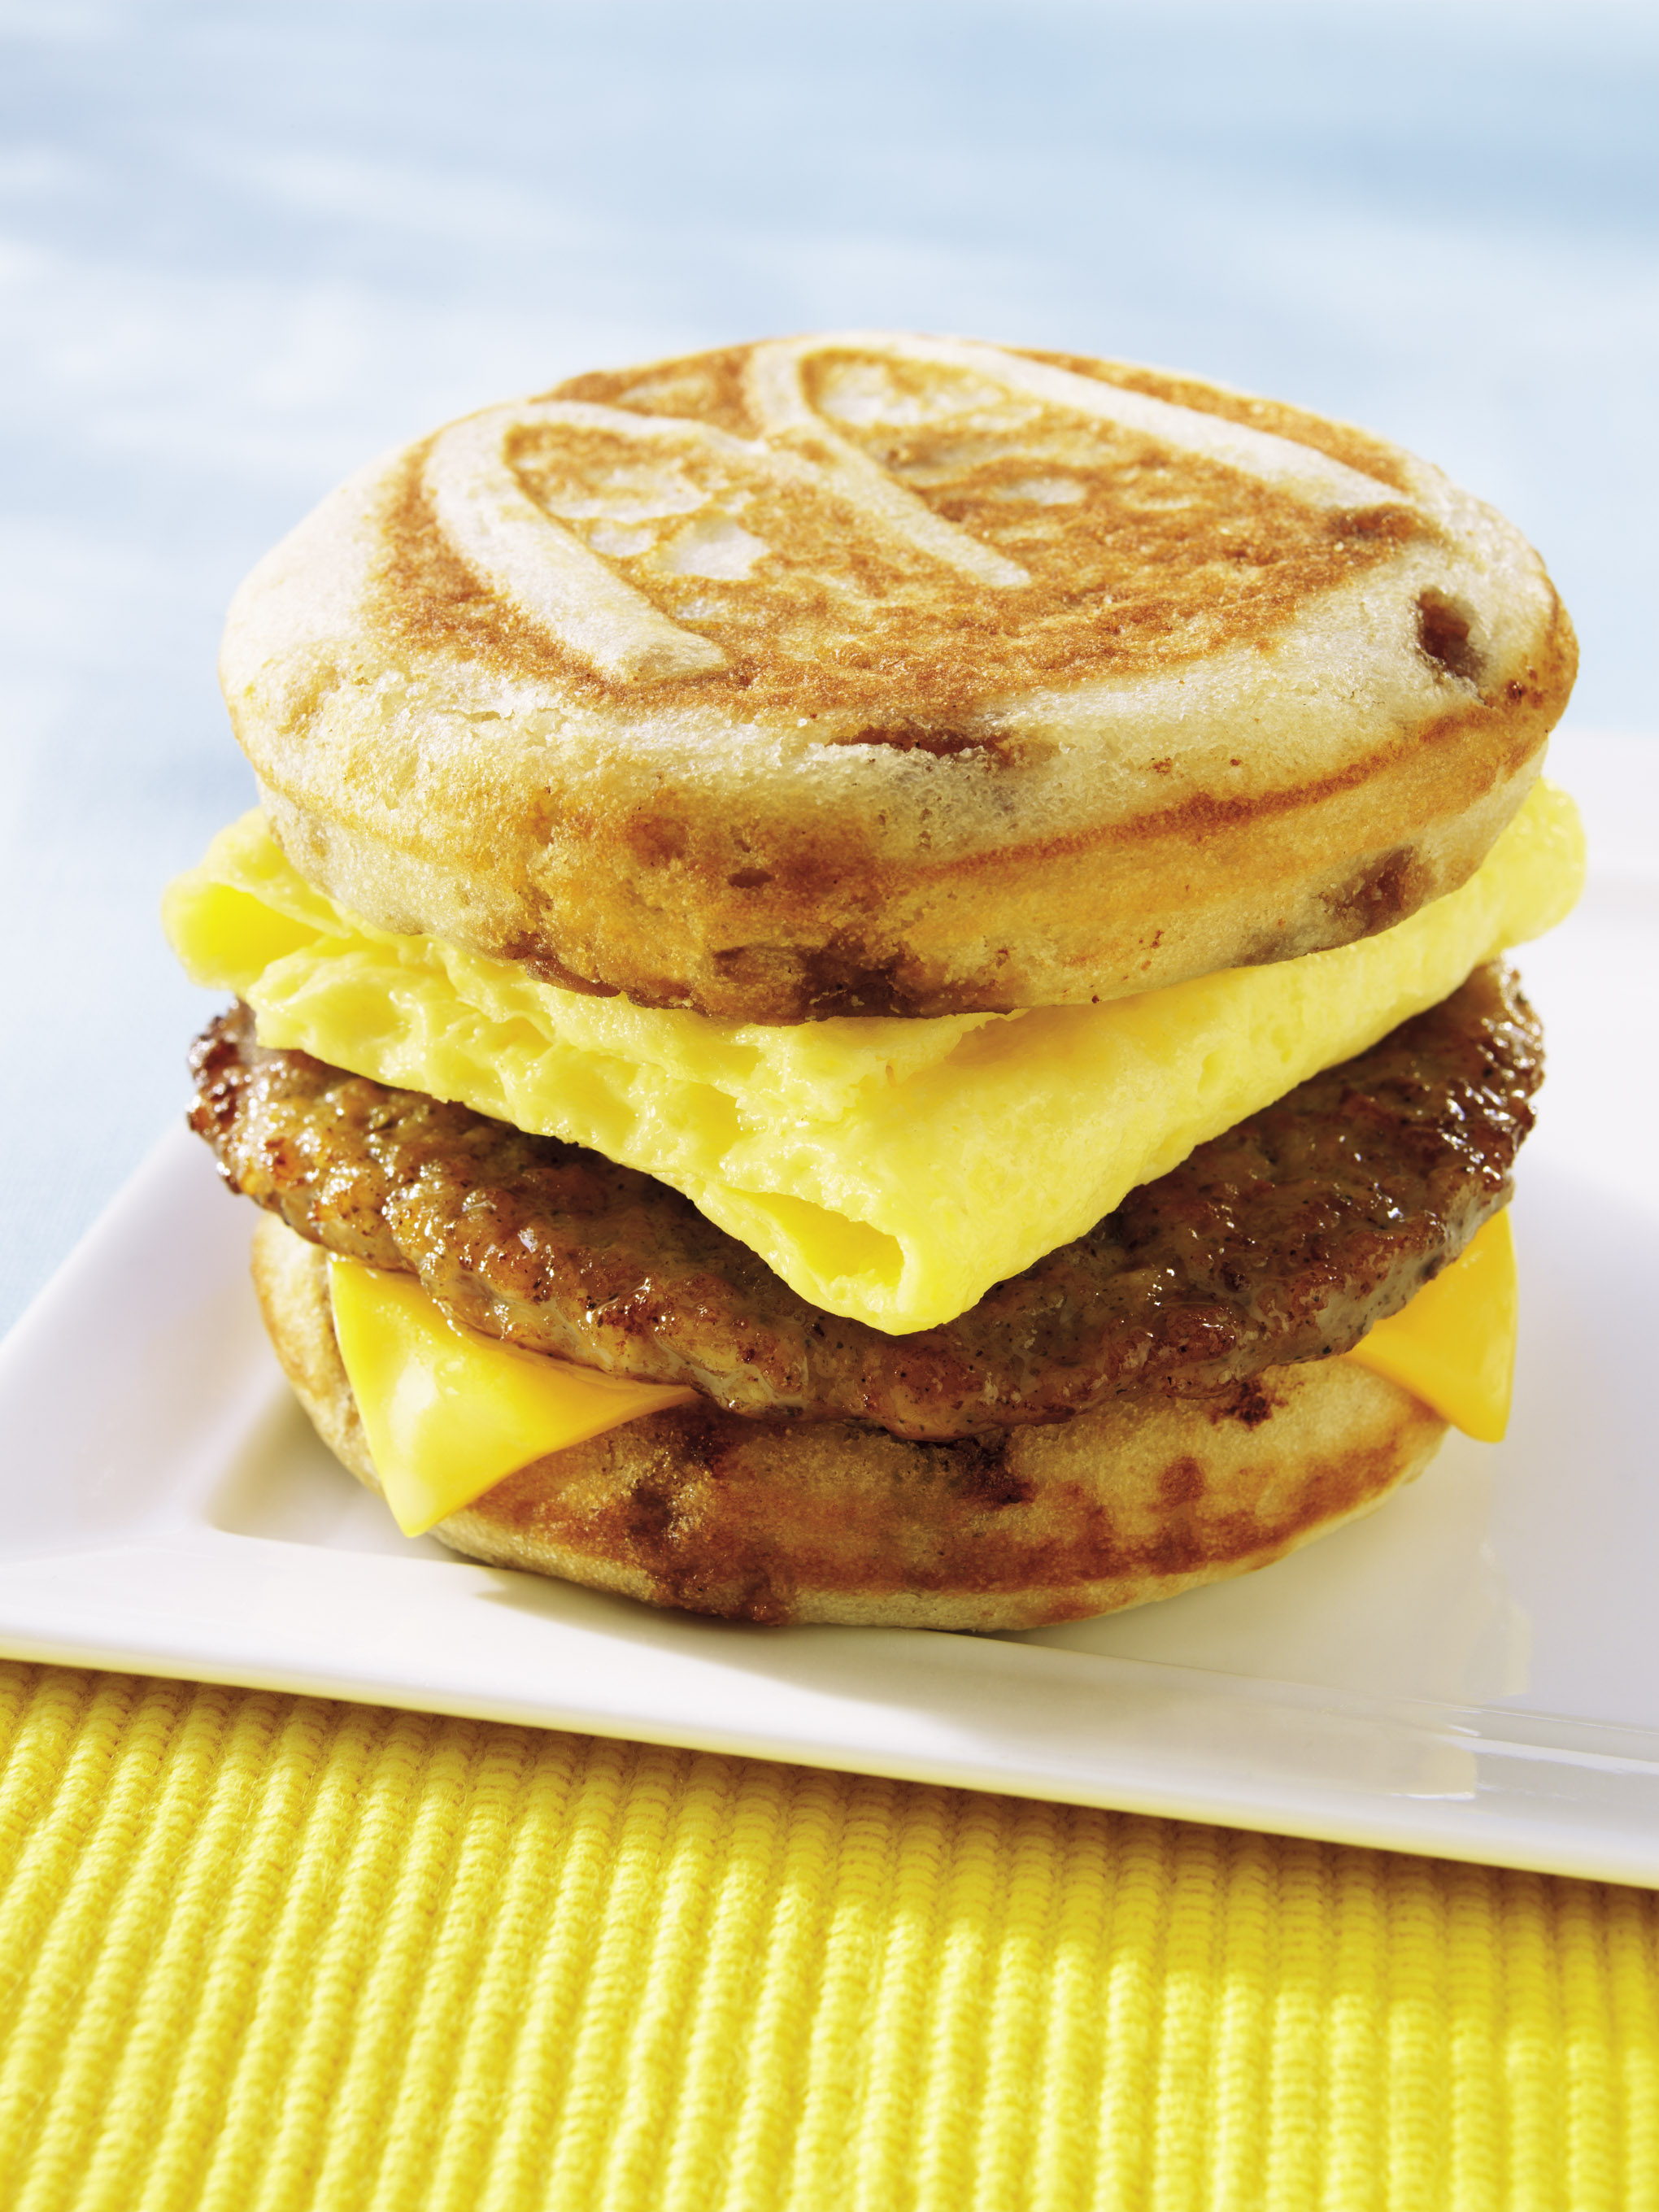 Copy Cat Gourmet: McDonald’s McGriddle (with Recipe) | The Talking Spoon